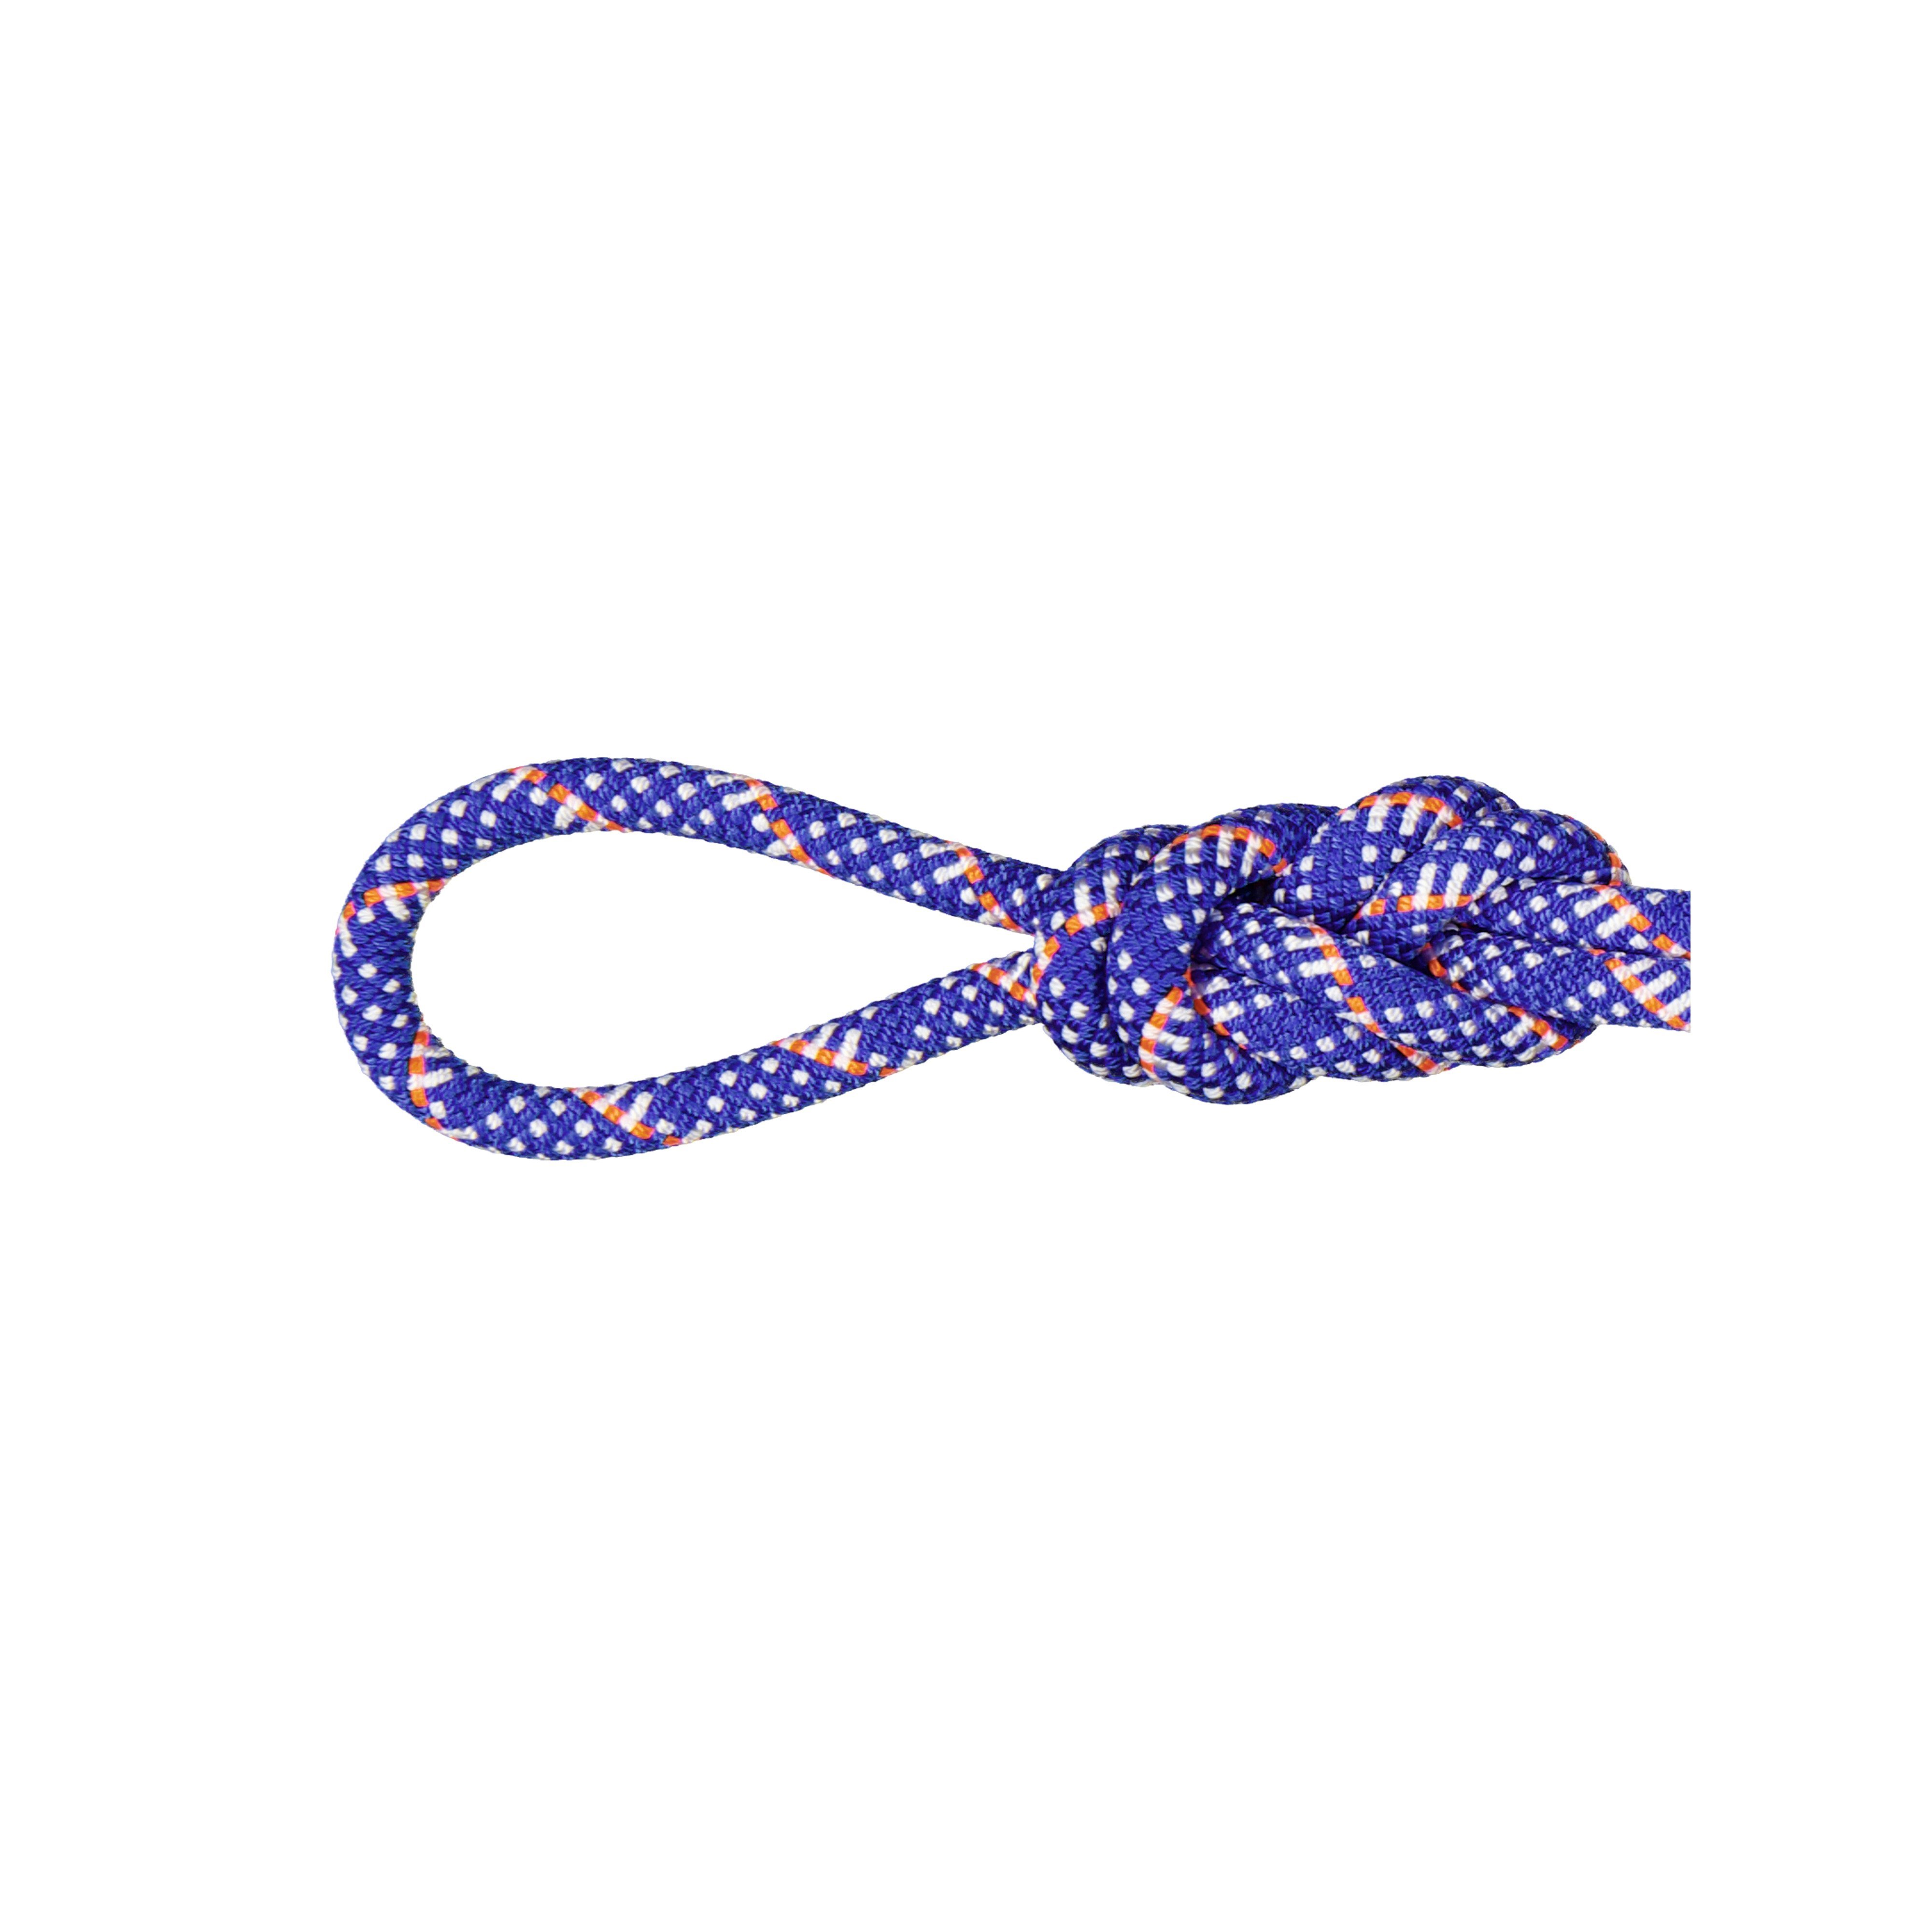 10.1 Gym Station Classic Rope - Classic Standard, blue-white, 200 m product image